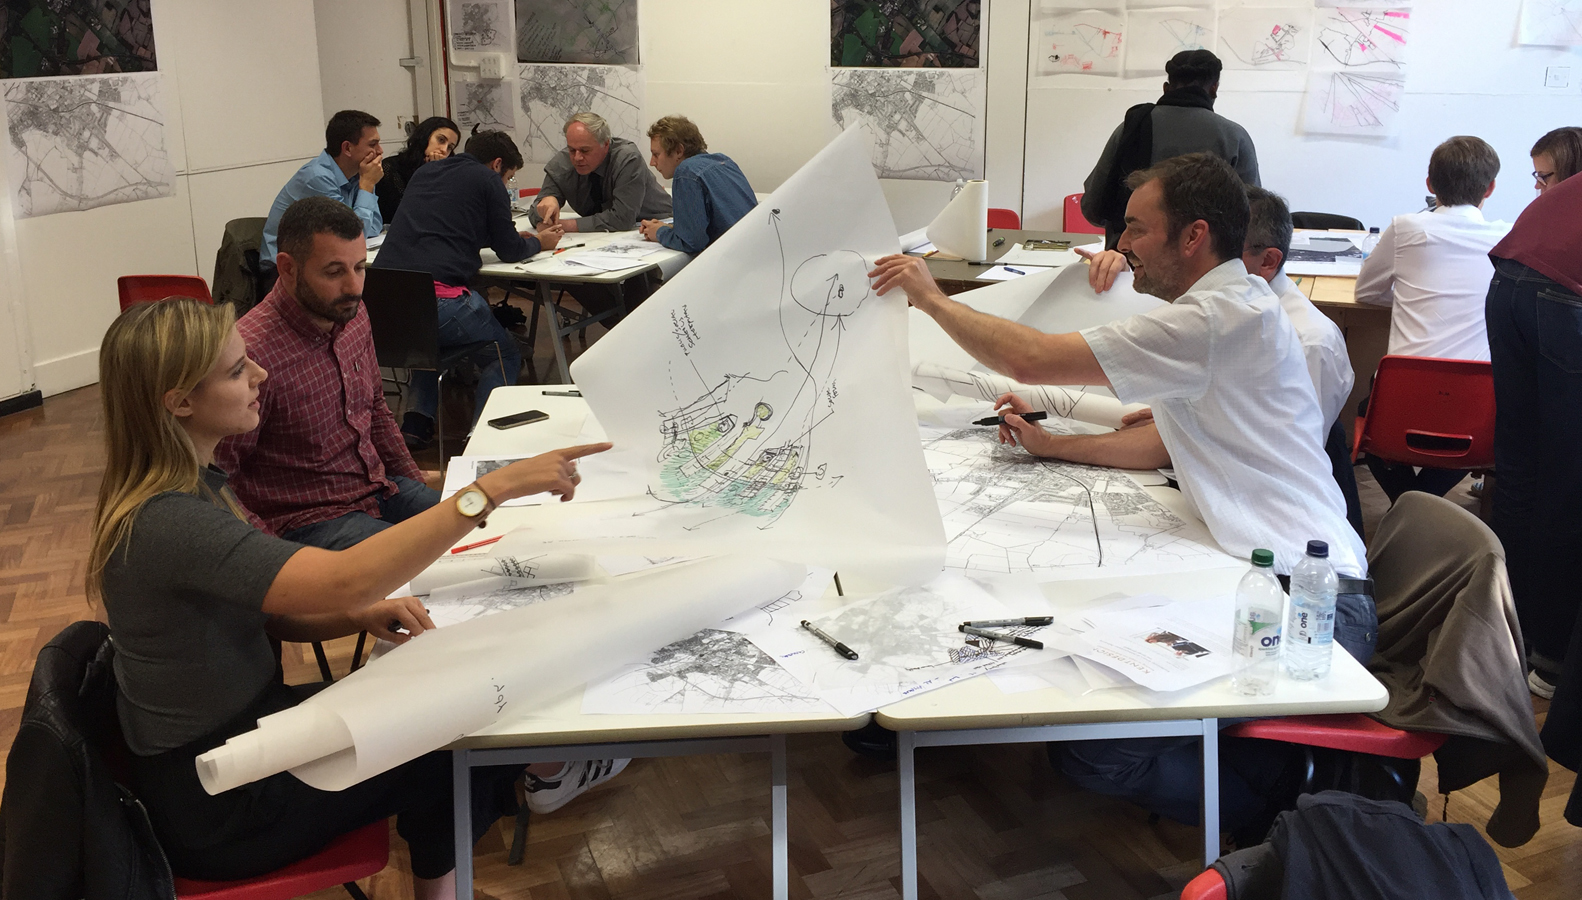  Stephen Proctor is invited to take part in the Urban Design Autumn School at UCA Canterbury School of Architecture